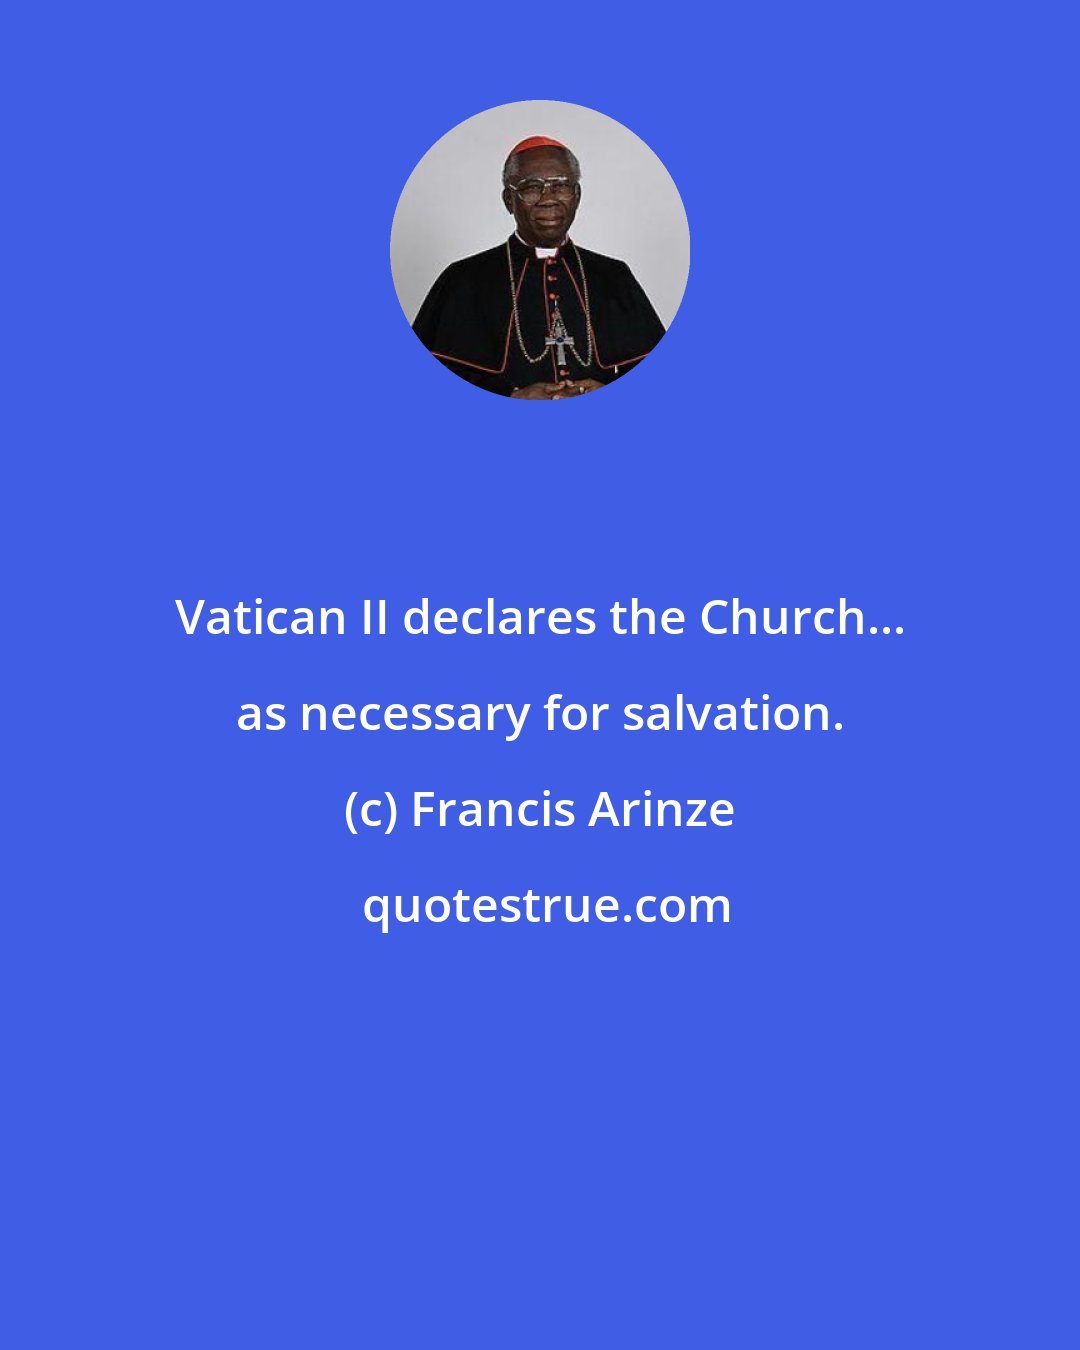 Francis Arinze: Vatican II declares the Church... as necessary for salvation.